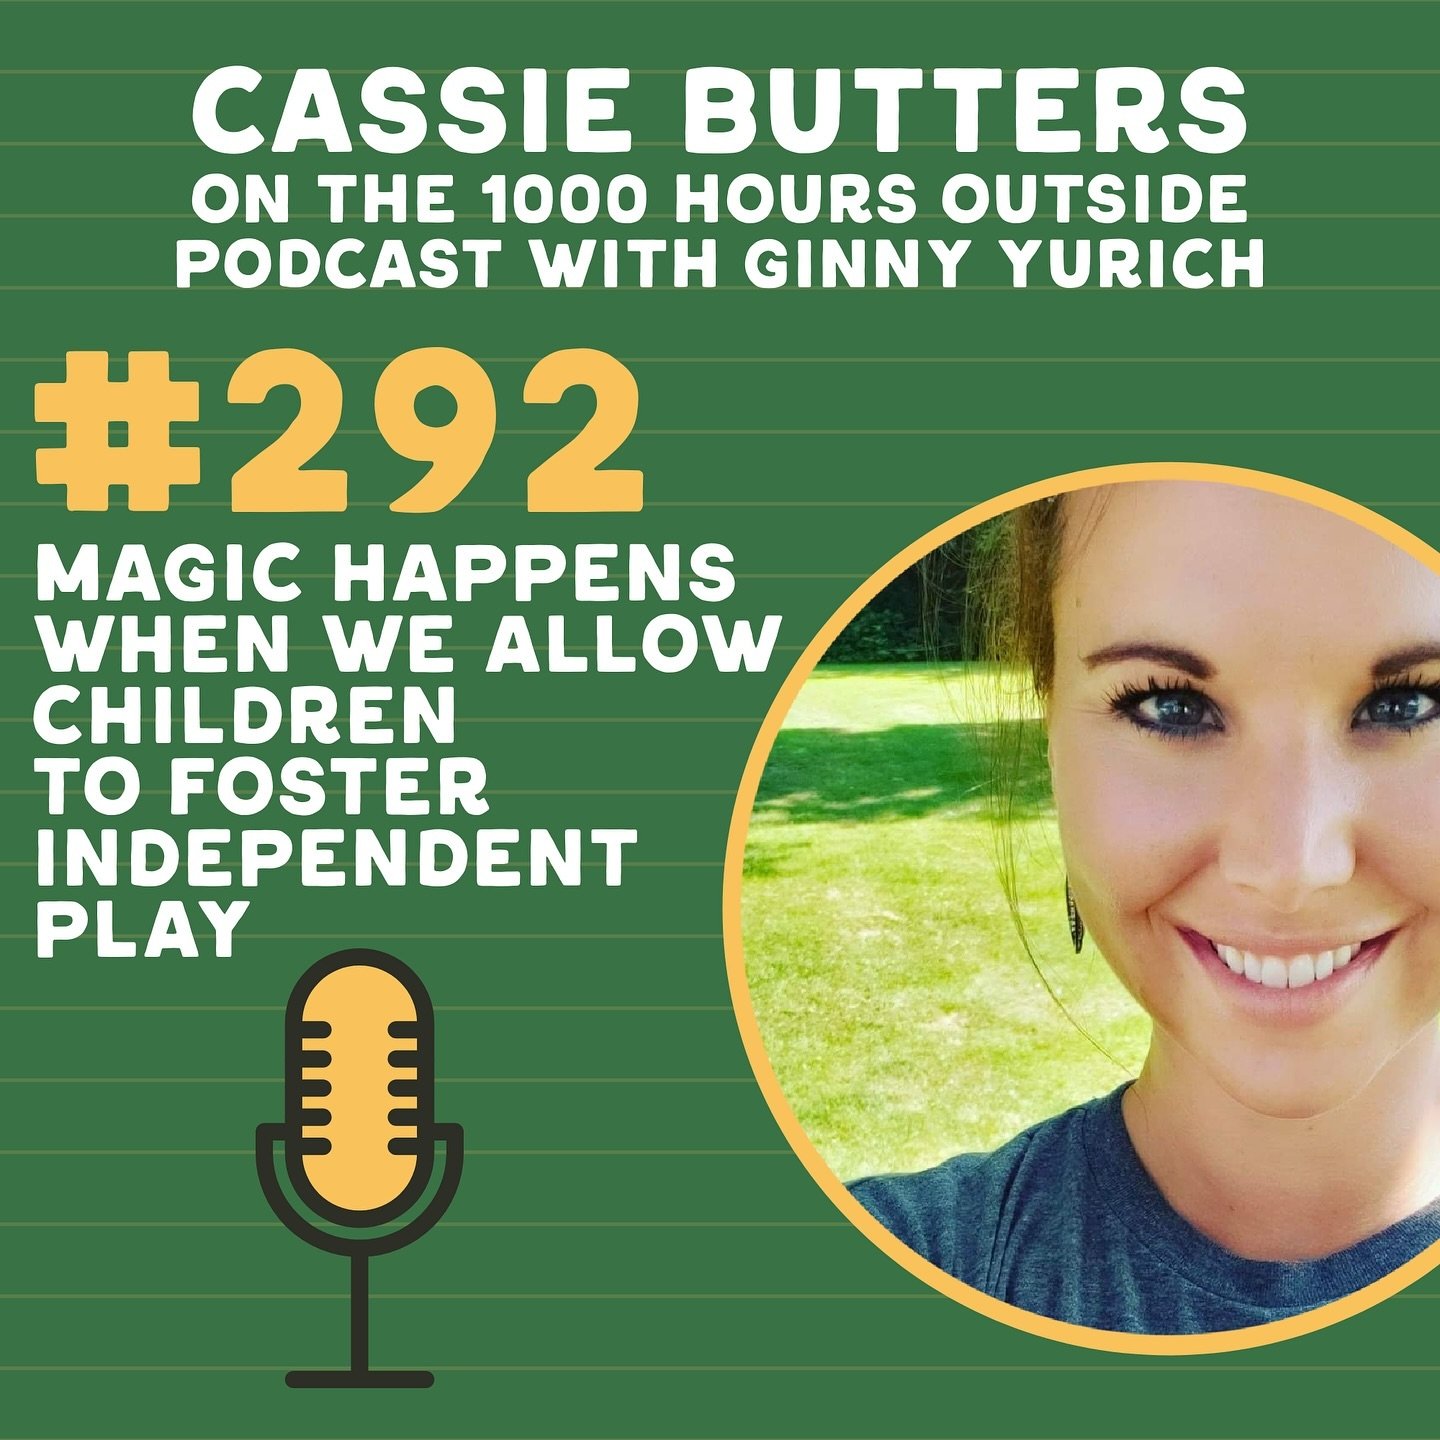 There are some really good reminders here ➡️

@timbernook.mid.michigan is starting the first TimberNook in Michigan and in this episode we talk about the why and the how! Cassie is an occupational therapist herself and she has a lot of insight into w